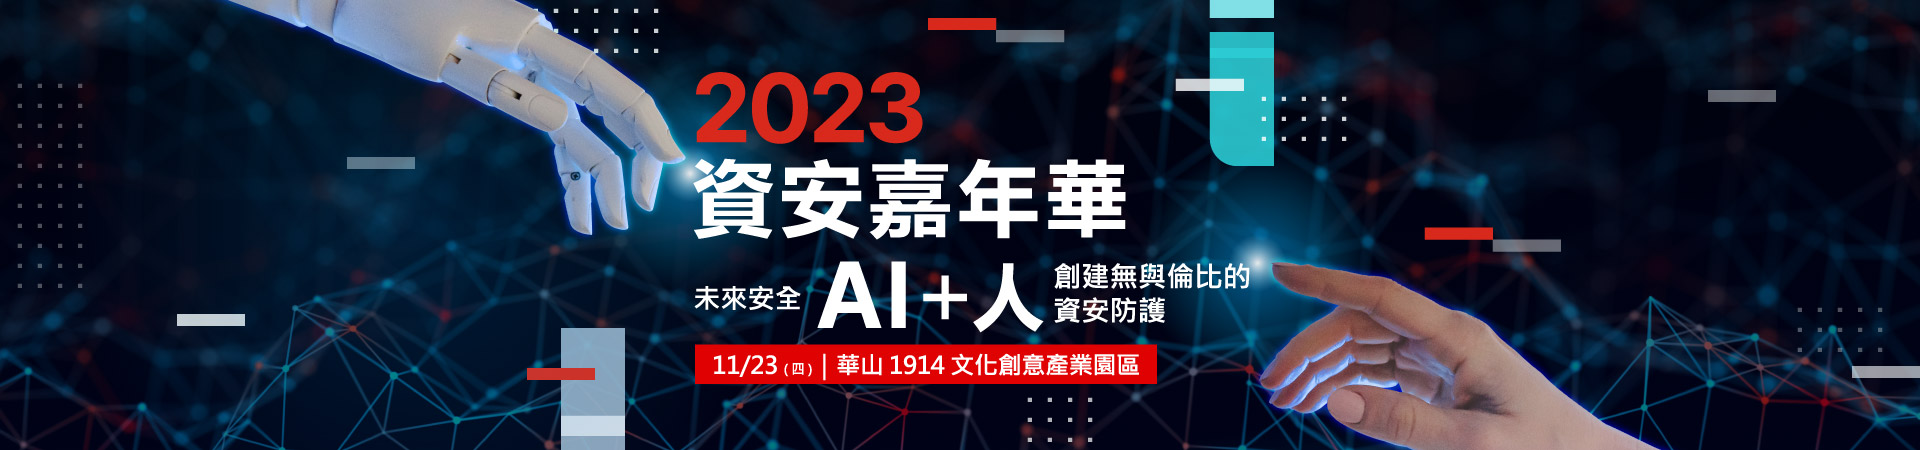 2023 Fortinet 資安嘉年華